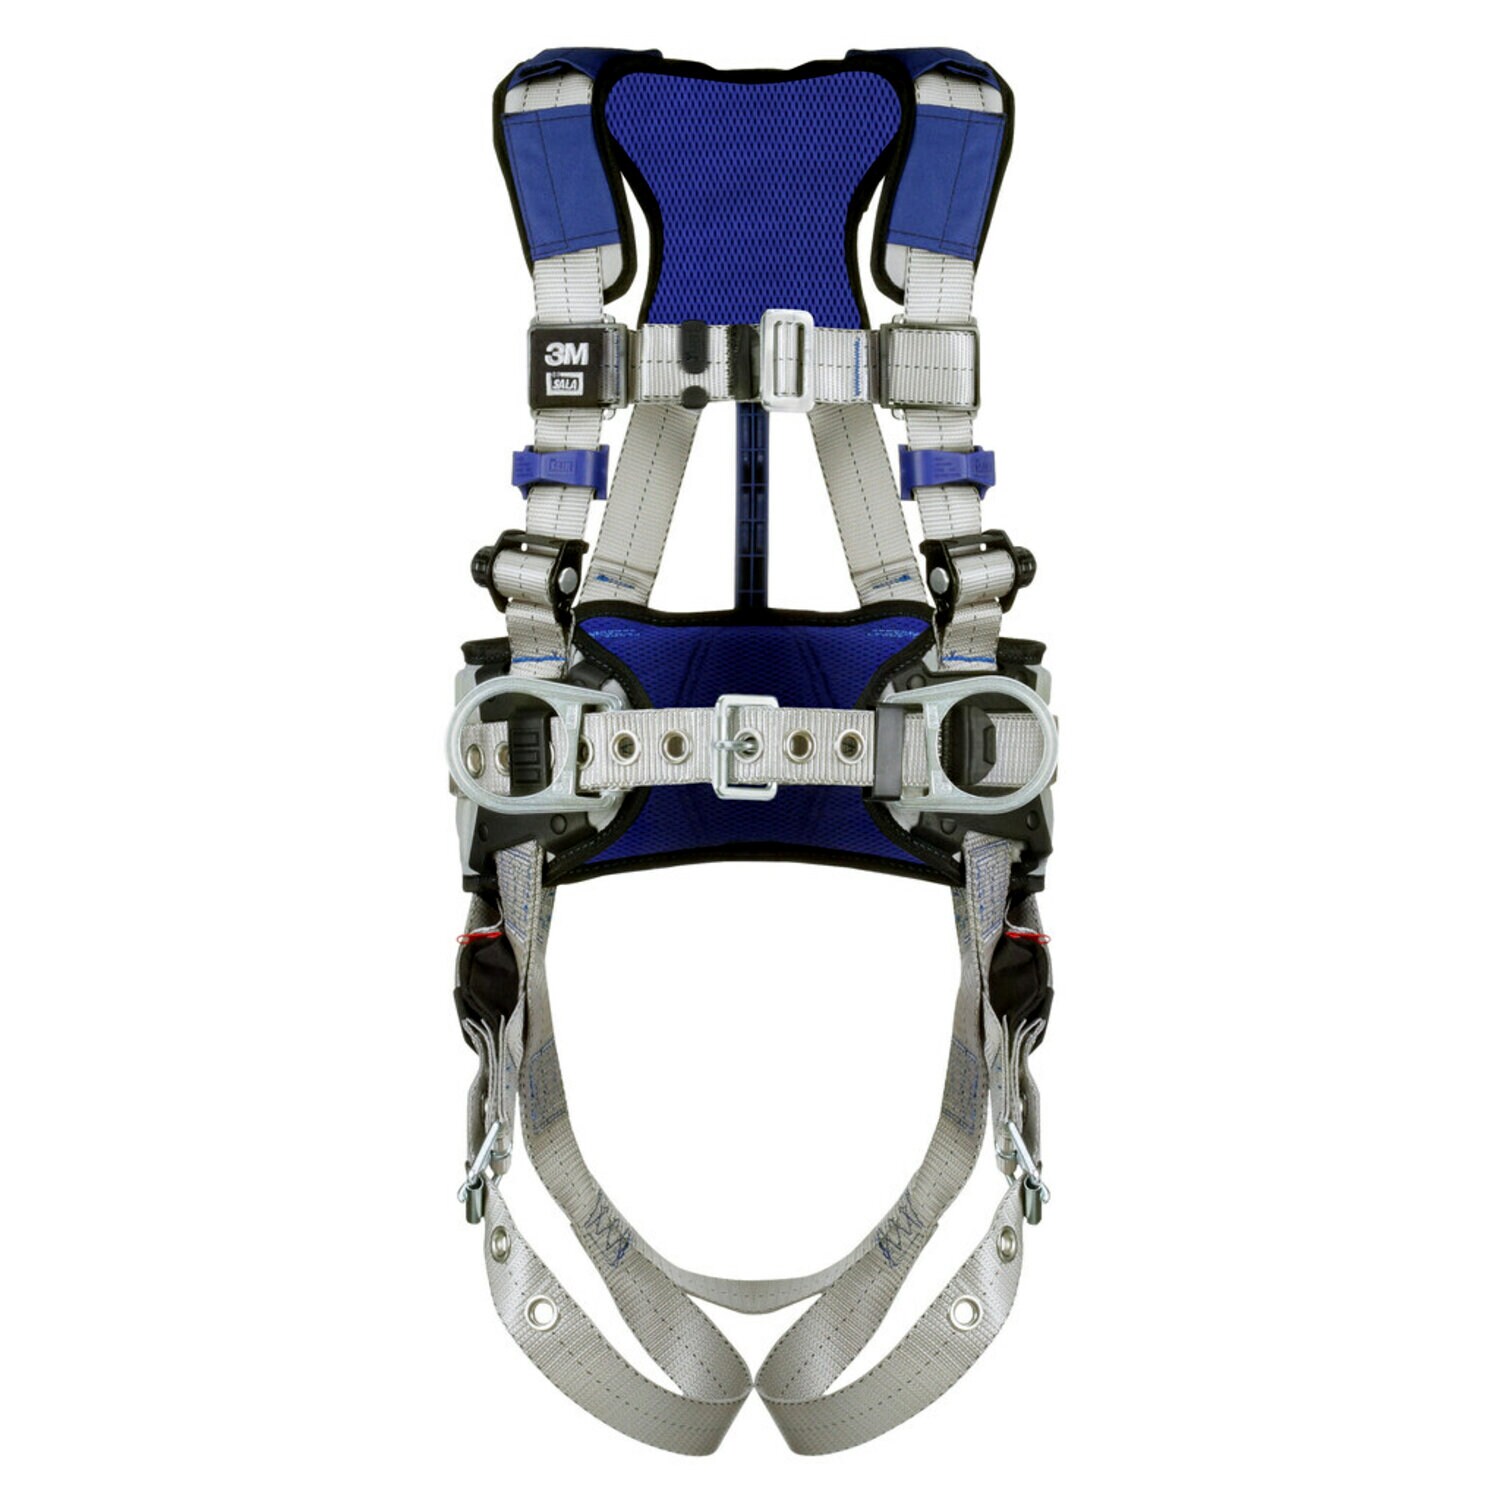 7012817508 - 3M DBI-SALA ExoFit X100 Comfort Construction Positioning Safety Harness 1401040, Small